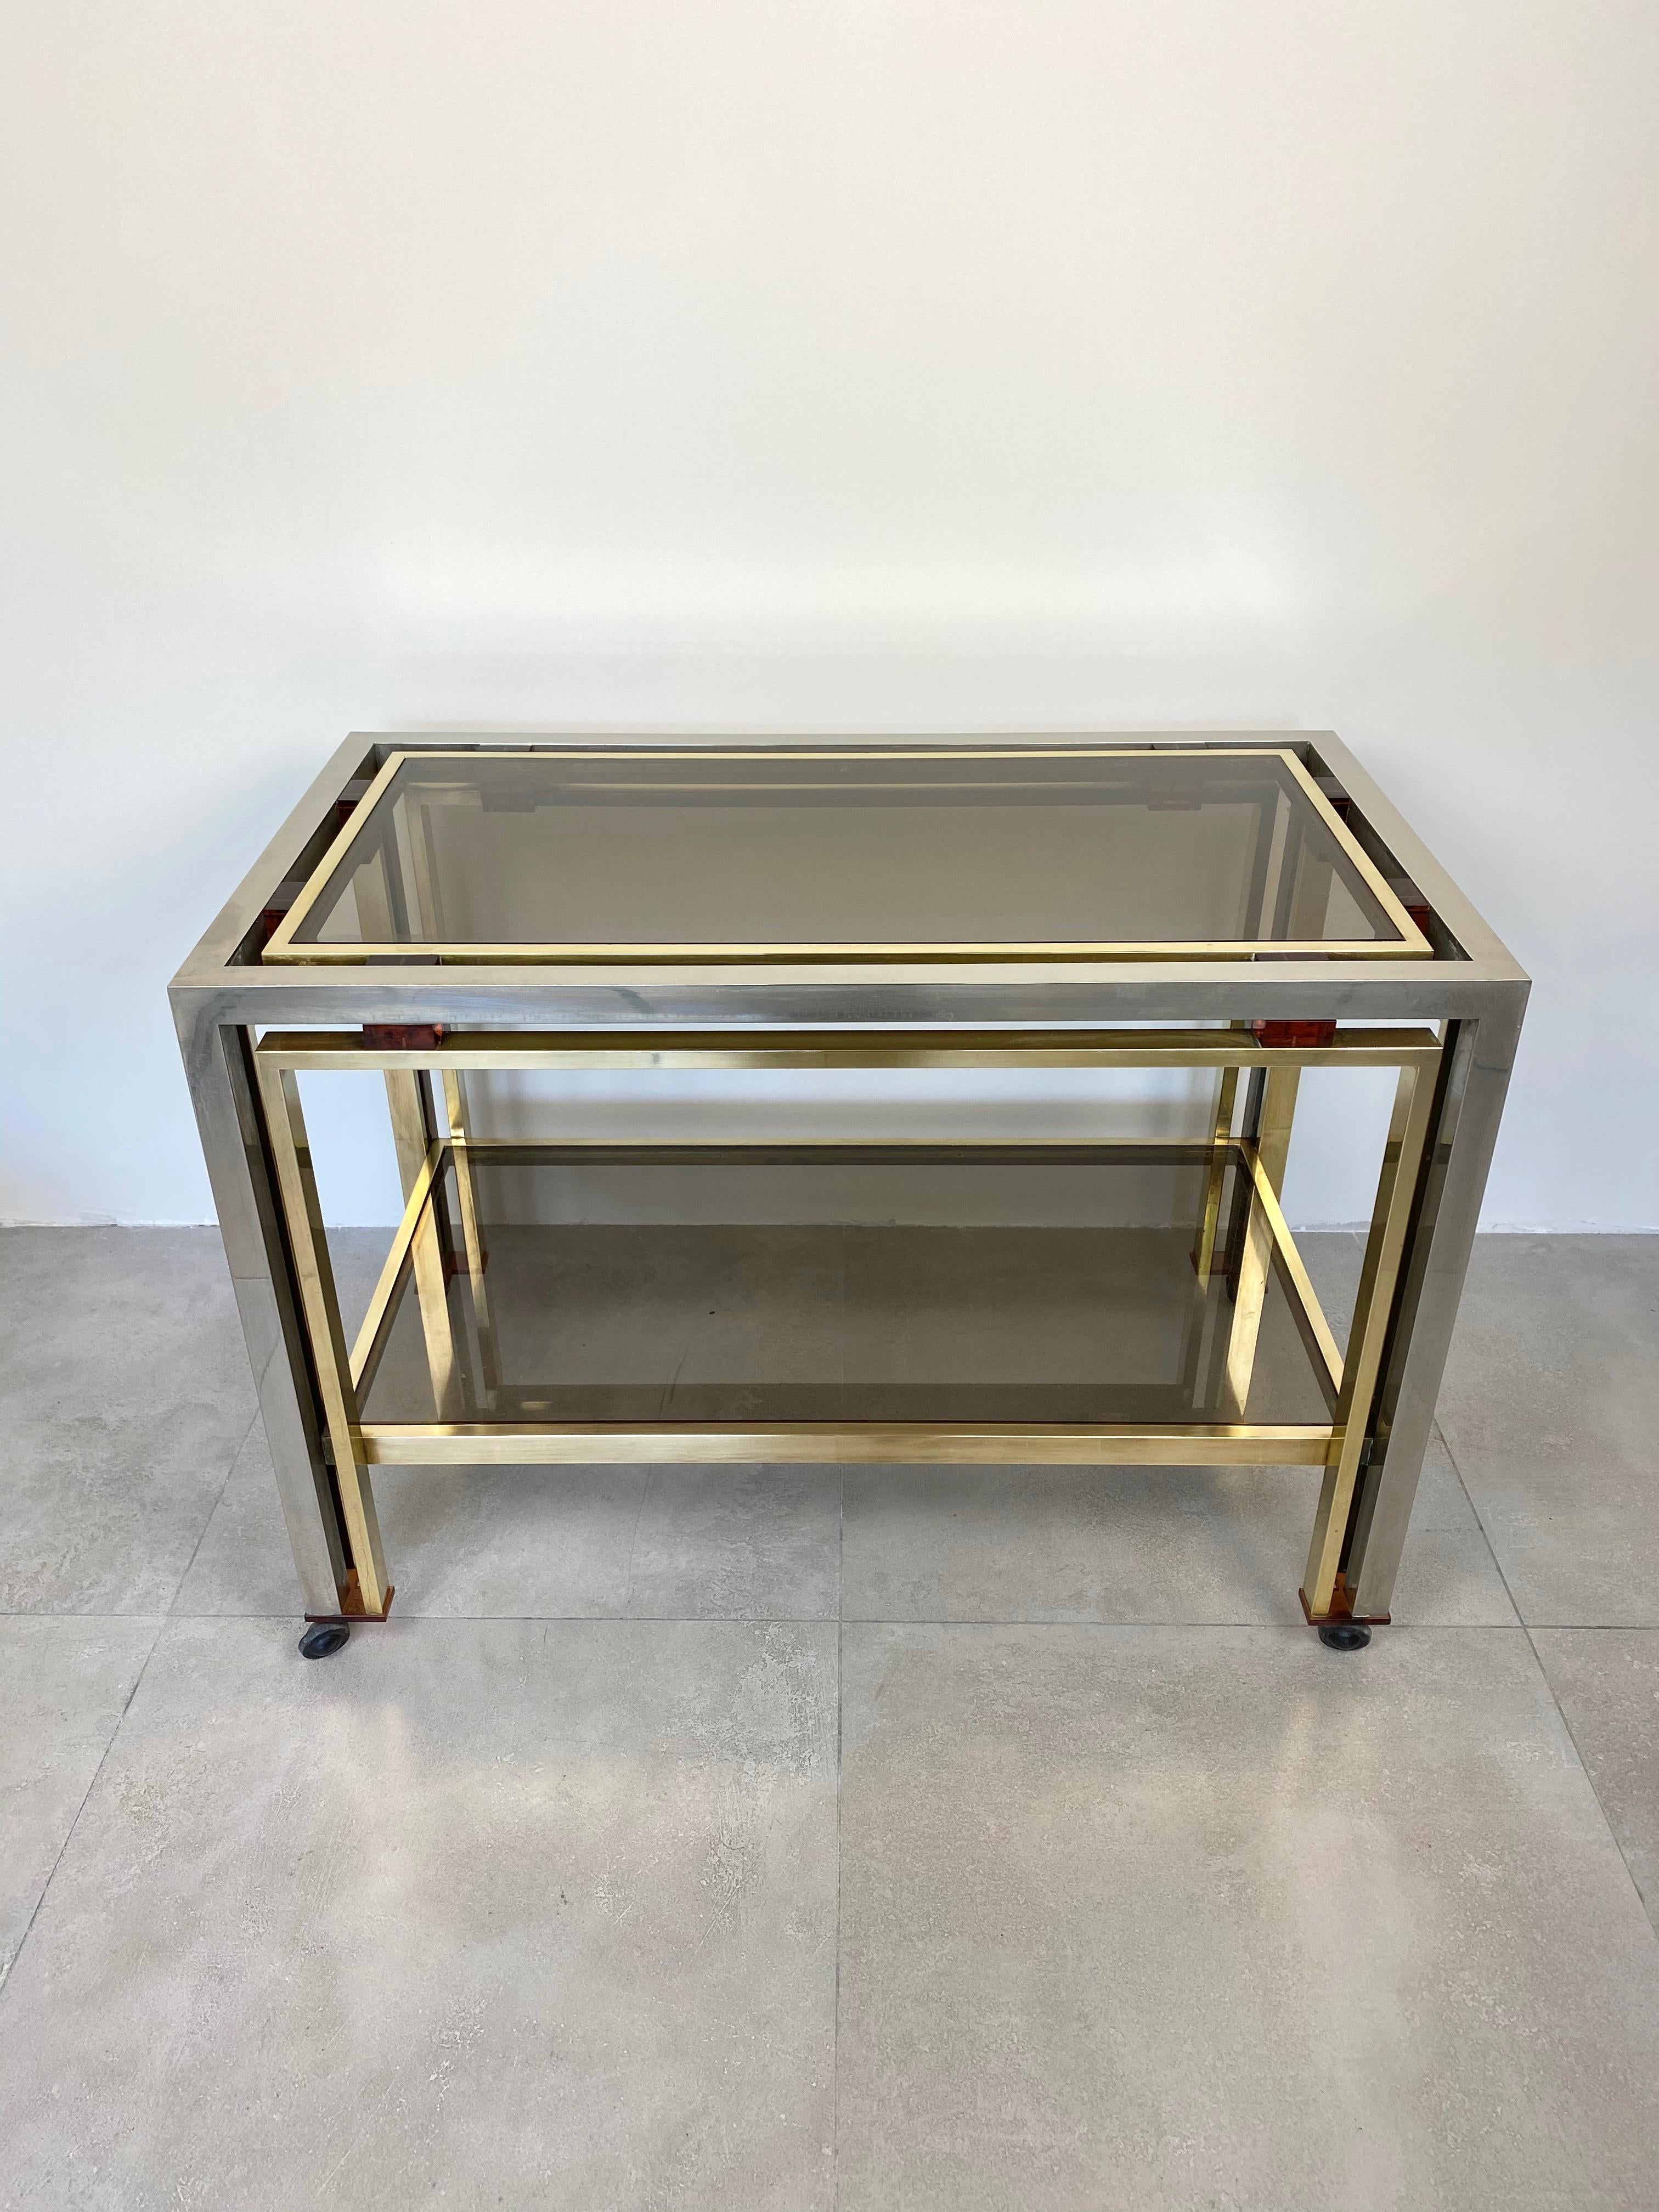 Mid-Century Modern Romeo Rega Cart Table in Chrome, Lucite and Brass, Italy, 1970s For Sale